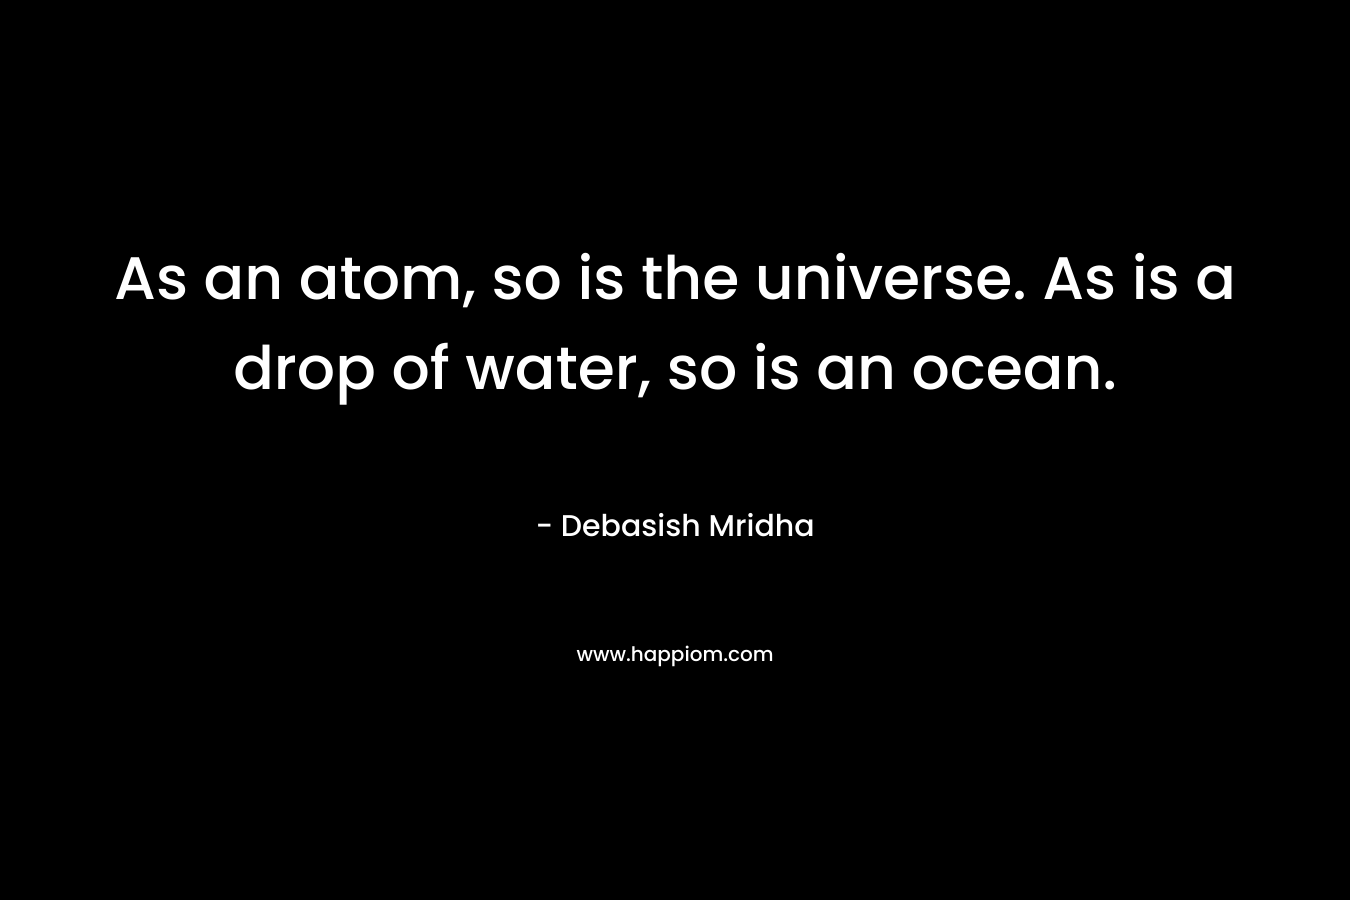 As an atom, so is the universe. As is a drop of water, so is an ocean. – Debasish Mridha